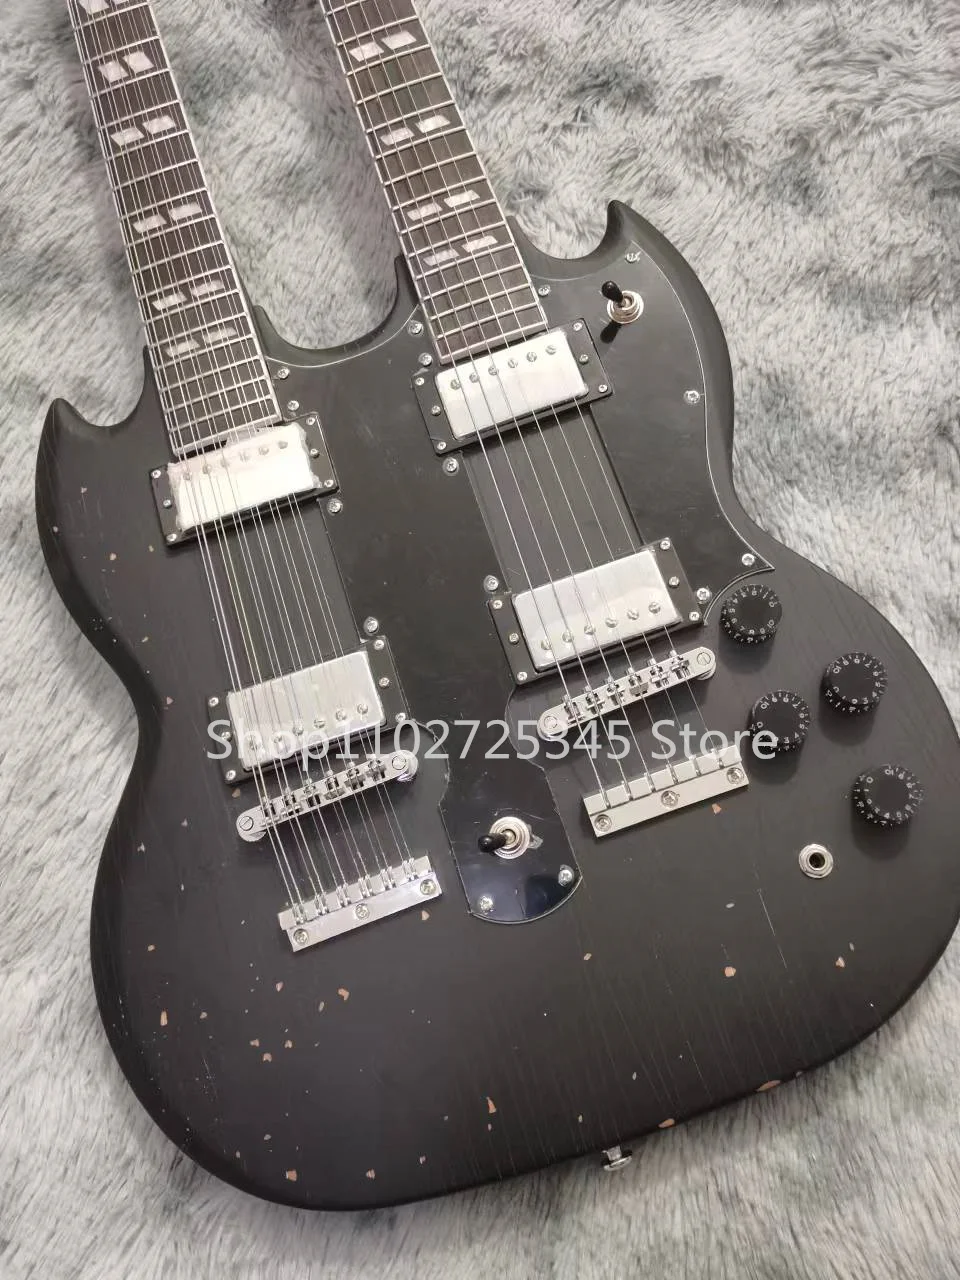 

Double Neck Electric Guitar, 6 + 12 Strings, Rosewood Fingerboard, Silver Accessories, Fixed Bridge, Free Shipping